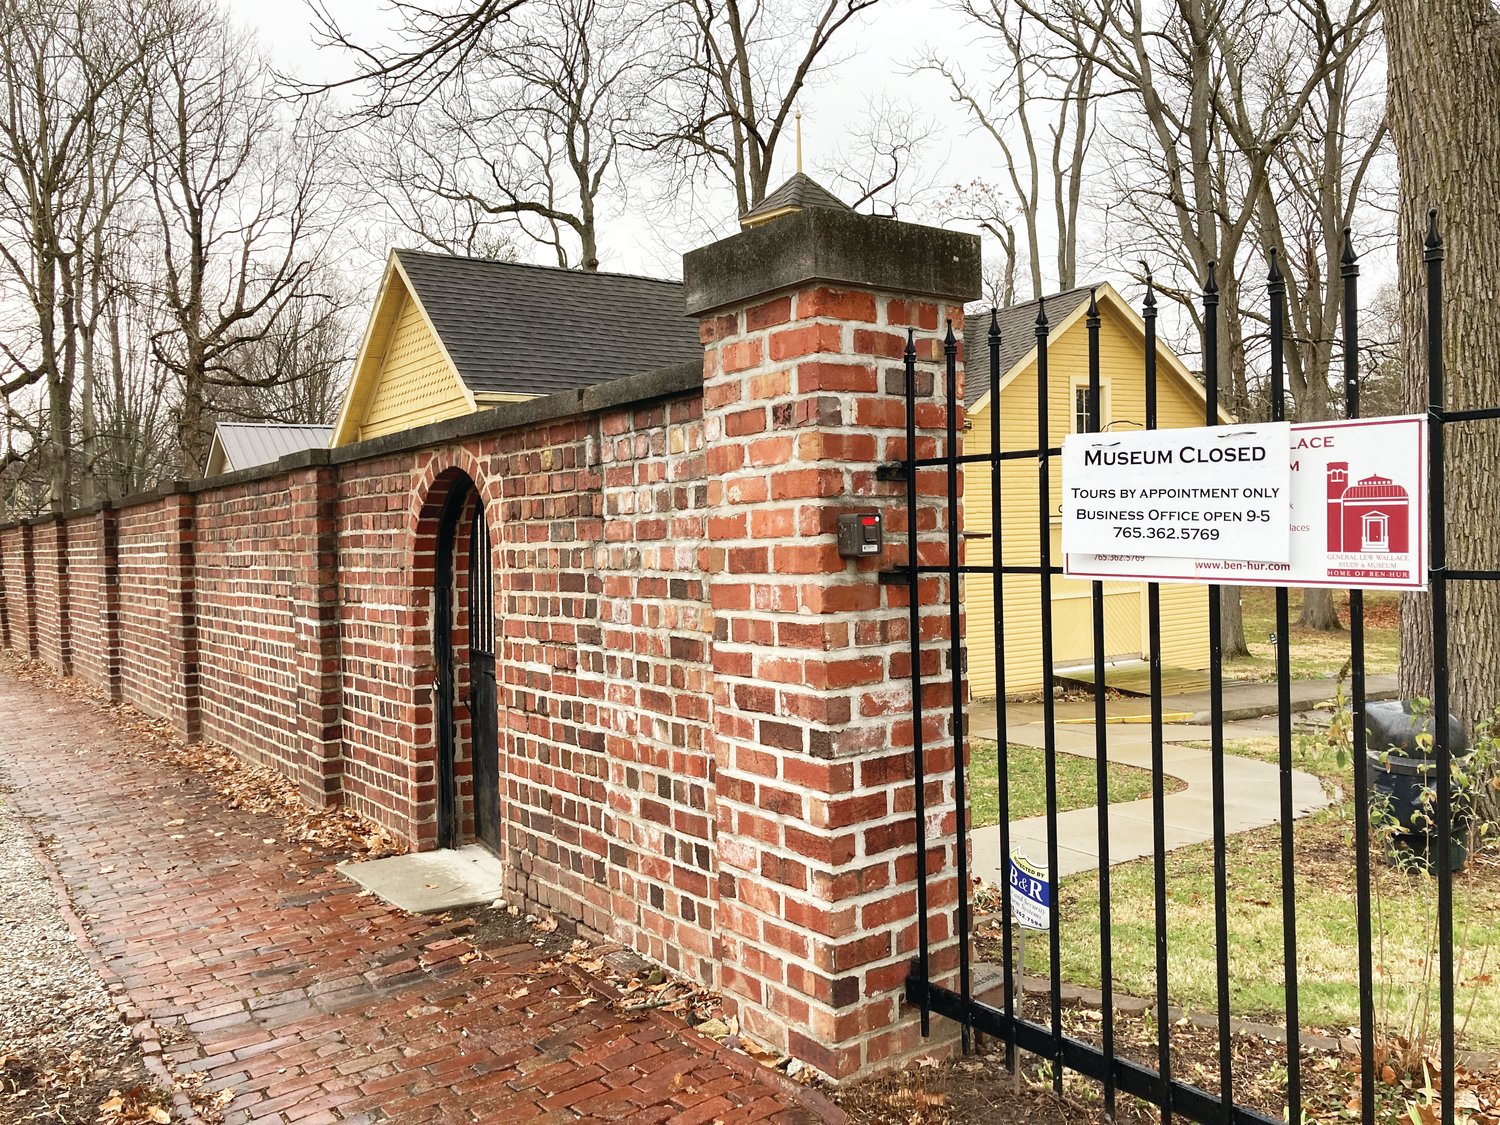 A section of the brick wall surrounding the grounds of the General Lew Wallace Study & Museum further down Elston Street will be restored in a project funded by local citizens and the Montgomery County Community Foundation.